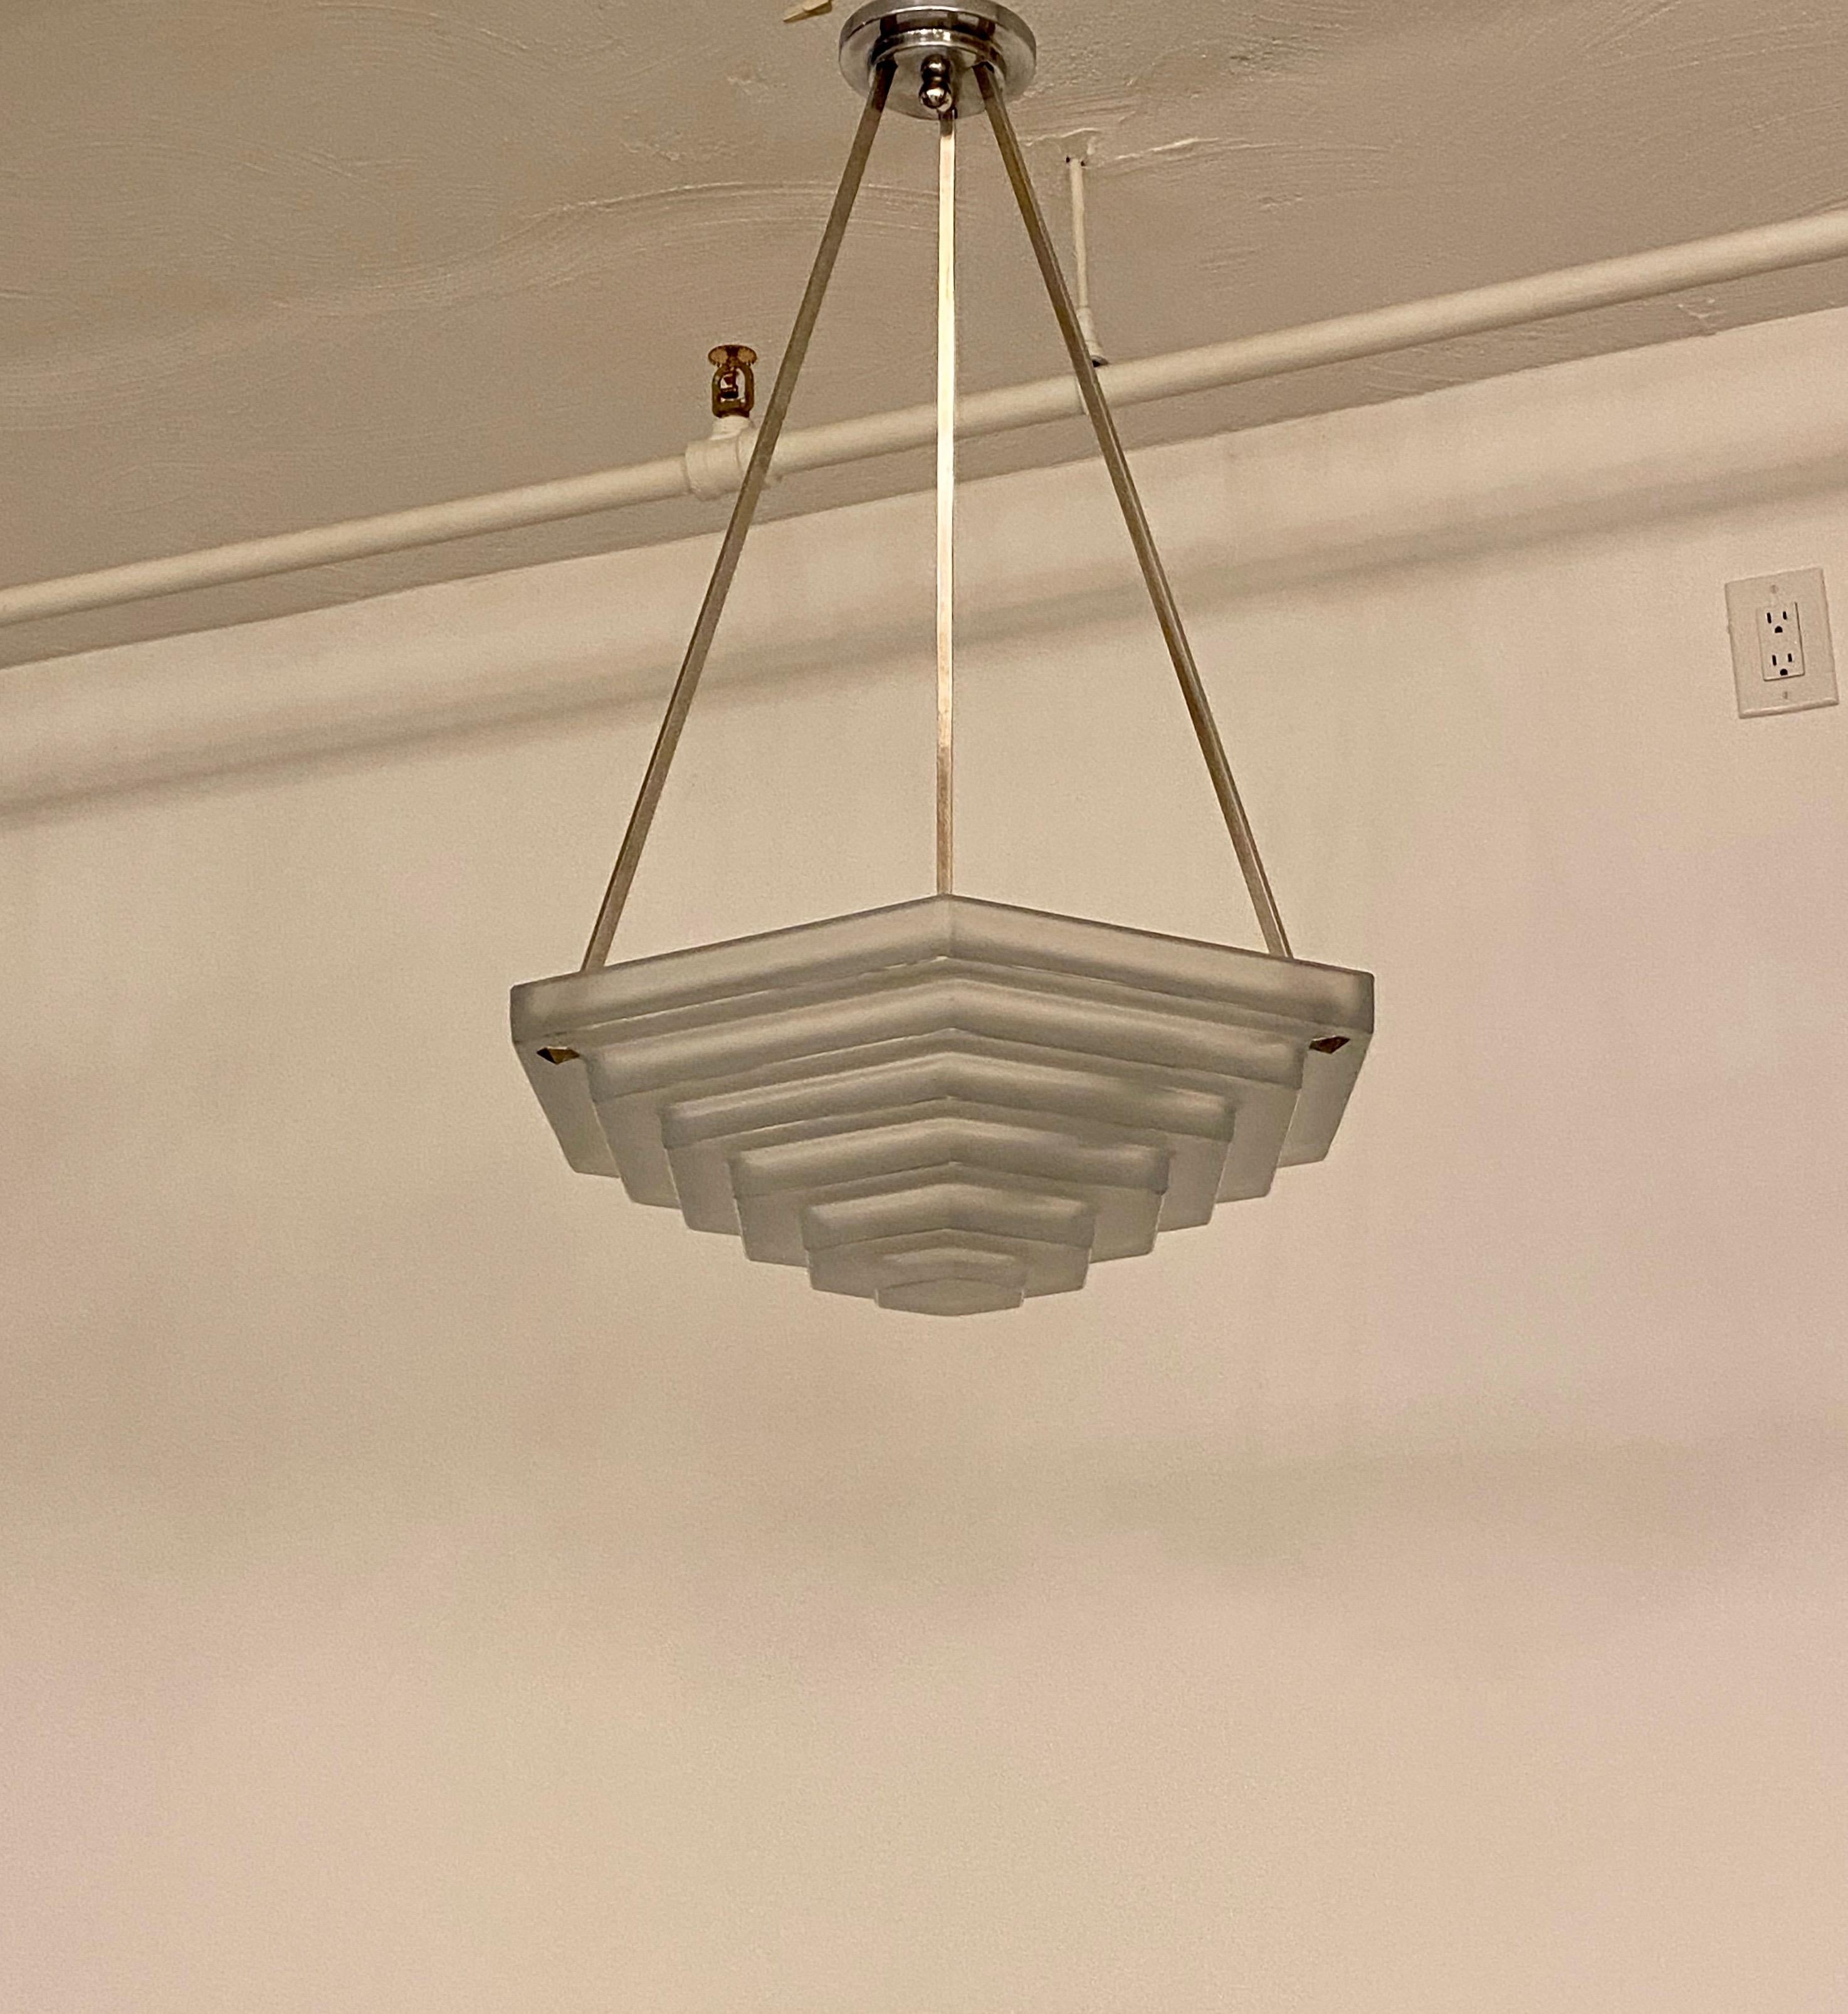 French Art Deco chandelier signed by French Artist Degue. Having one large stepped geometric glass shade. Held by three nickel rods. Has been rewired for American use with one medium base socket.